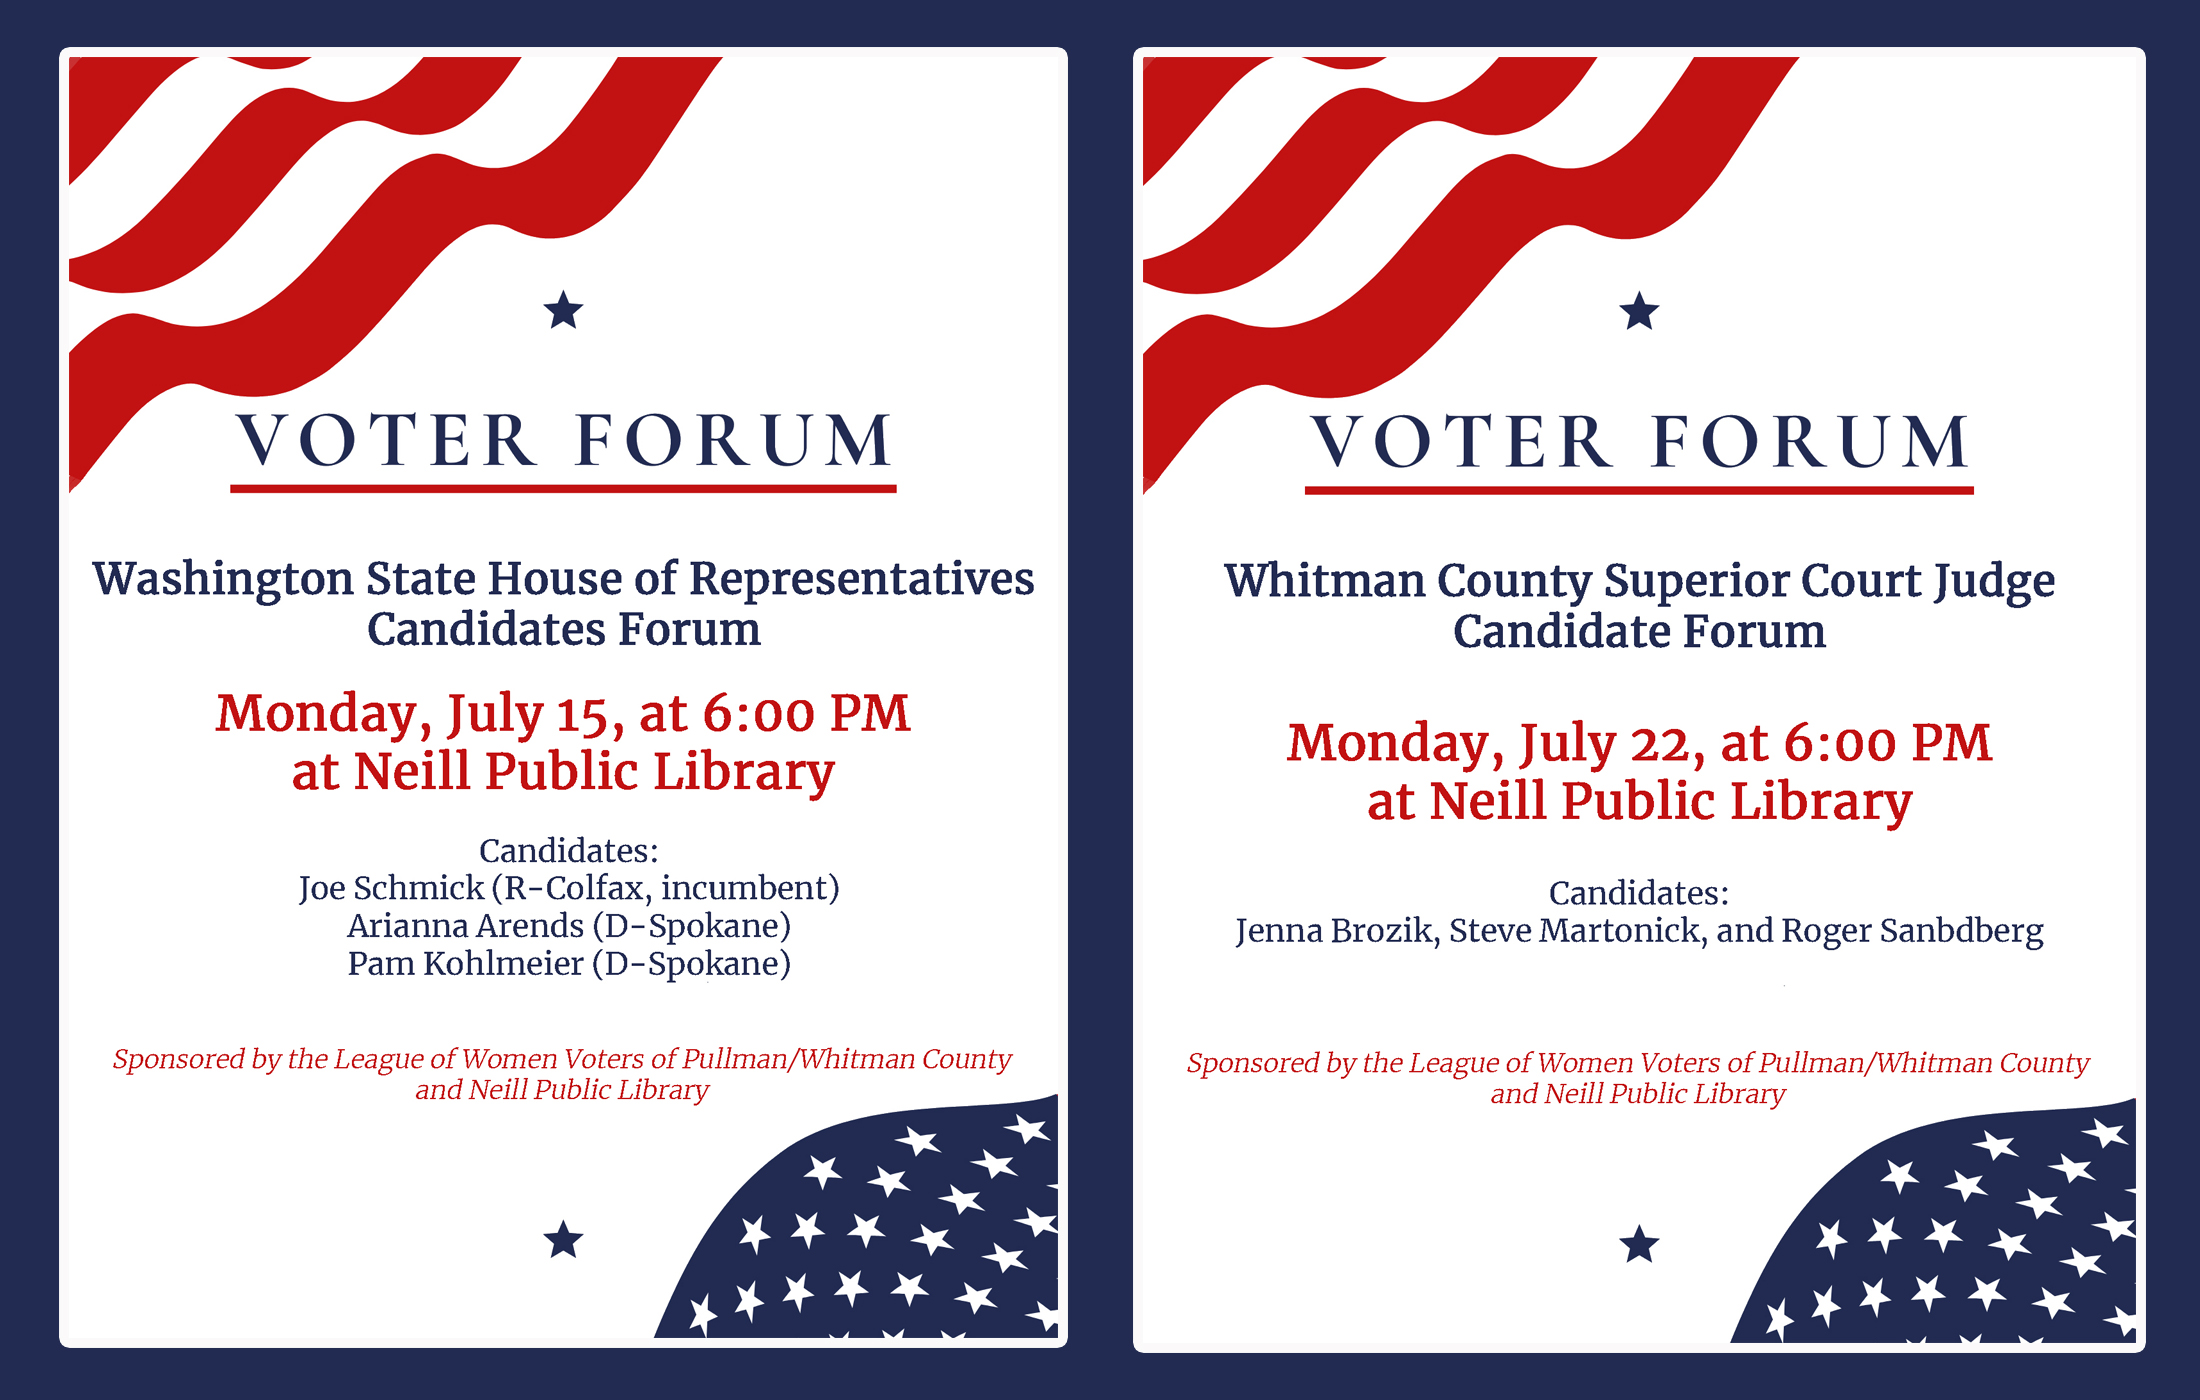 Picture of two voter forum posters red, white and blue. One for Washington State House of Representatives at the Neill Public Library Monday, July 15, at 6 p.m. Monday.  The candidates are Joe Schmick (R-Colfax, incumbent), Arianna Arends (D-Spokane), and Pam Kohlmeier (D-Spokane). The second posters for Whitman County Superior Court Judge on Monday, July 22, at 6:00 PM at Neill Public Library with candidates Jenna Brozik, Steve Martonick, and Roger Sanbdberg.